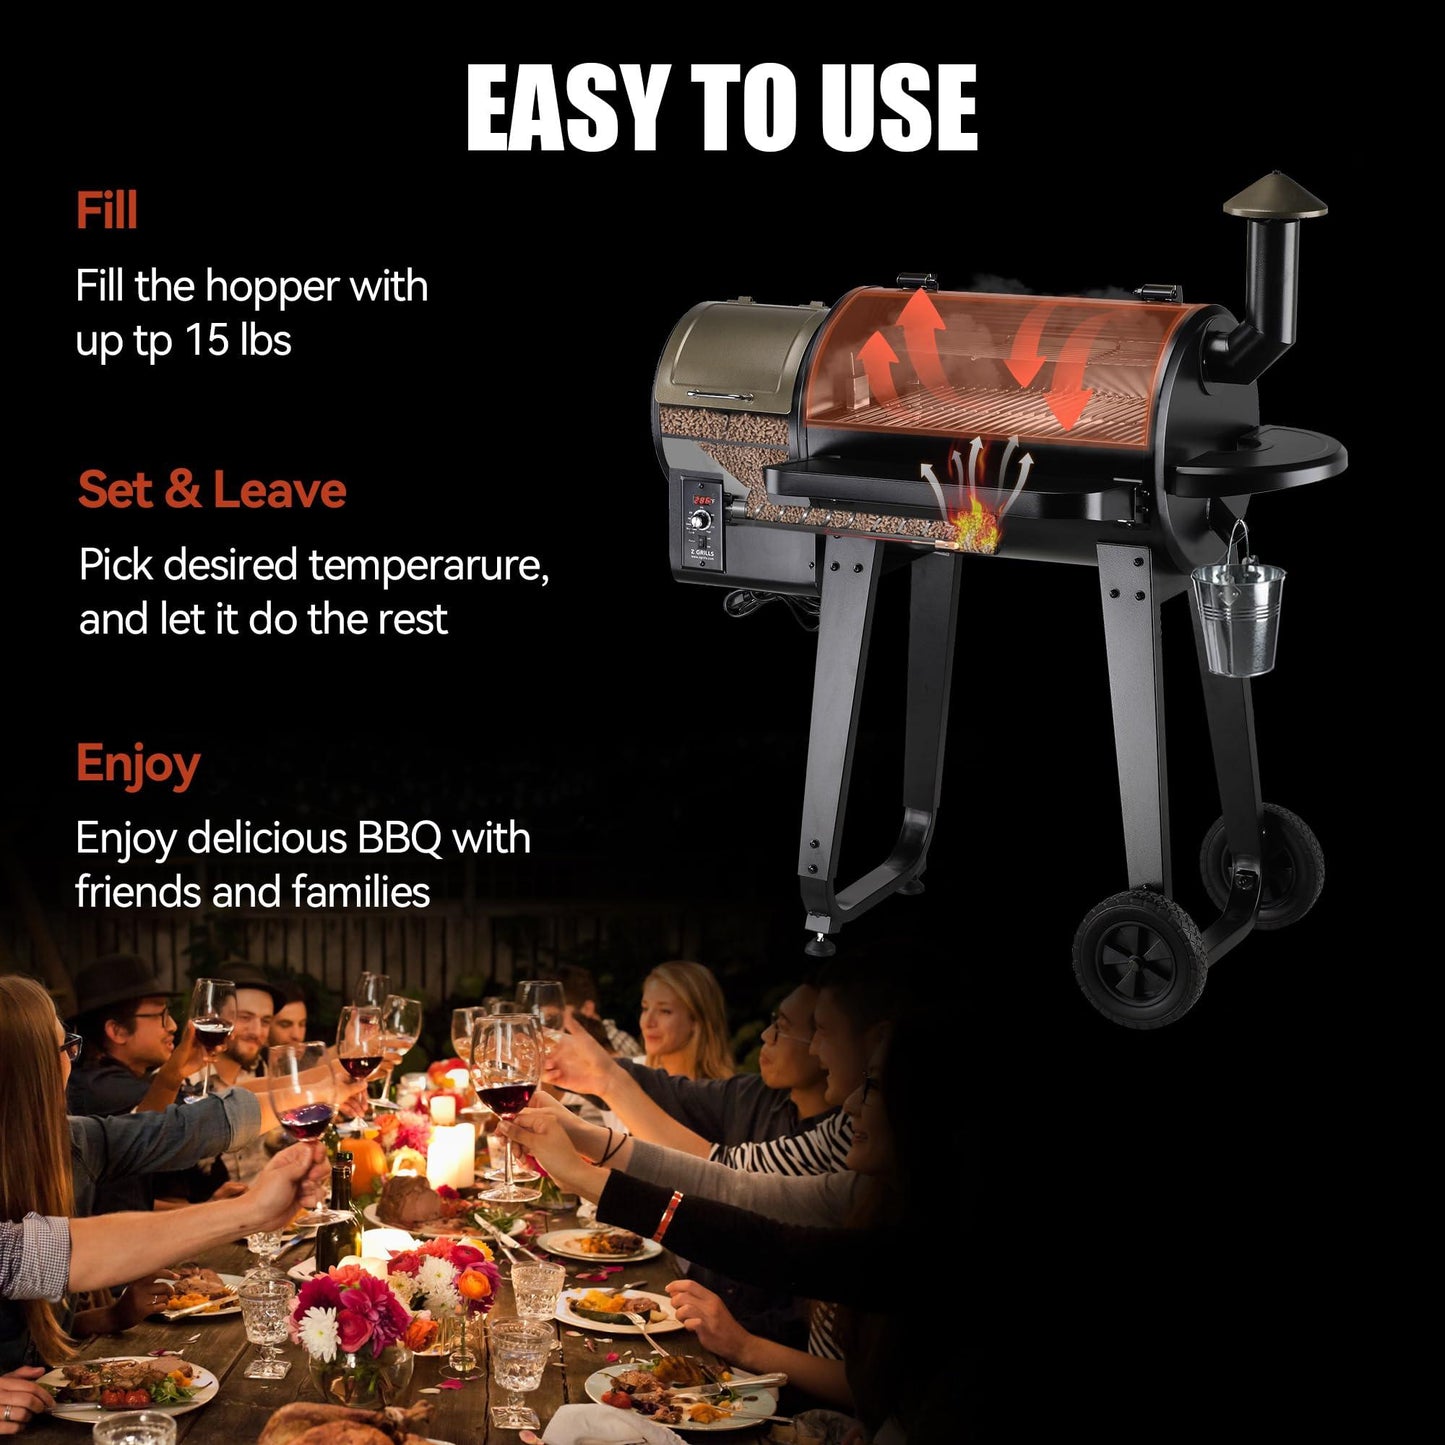 Z GRILLS Wood Pellet Grill Smoker, 8 in 1 Portable BBQ Grill with Automatic Temperature Control, Foldable Front Shelf, Rain Cover, 459 sq in Cooking Area for Patio, Backyard, Outdoor Barbecue, Bronze - CookCave